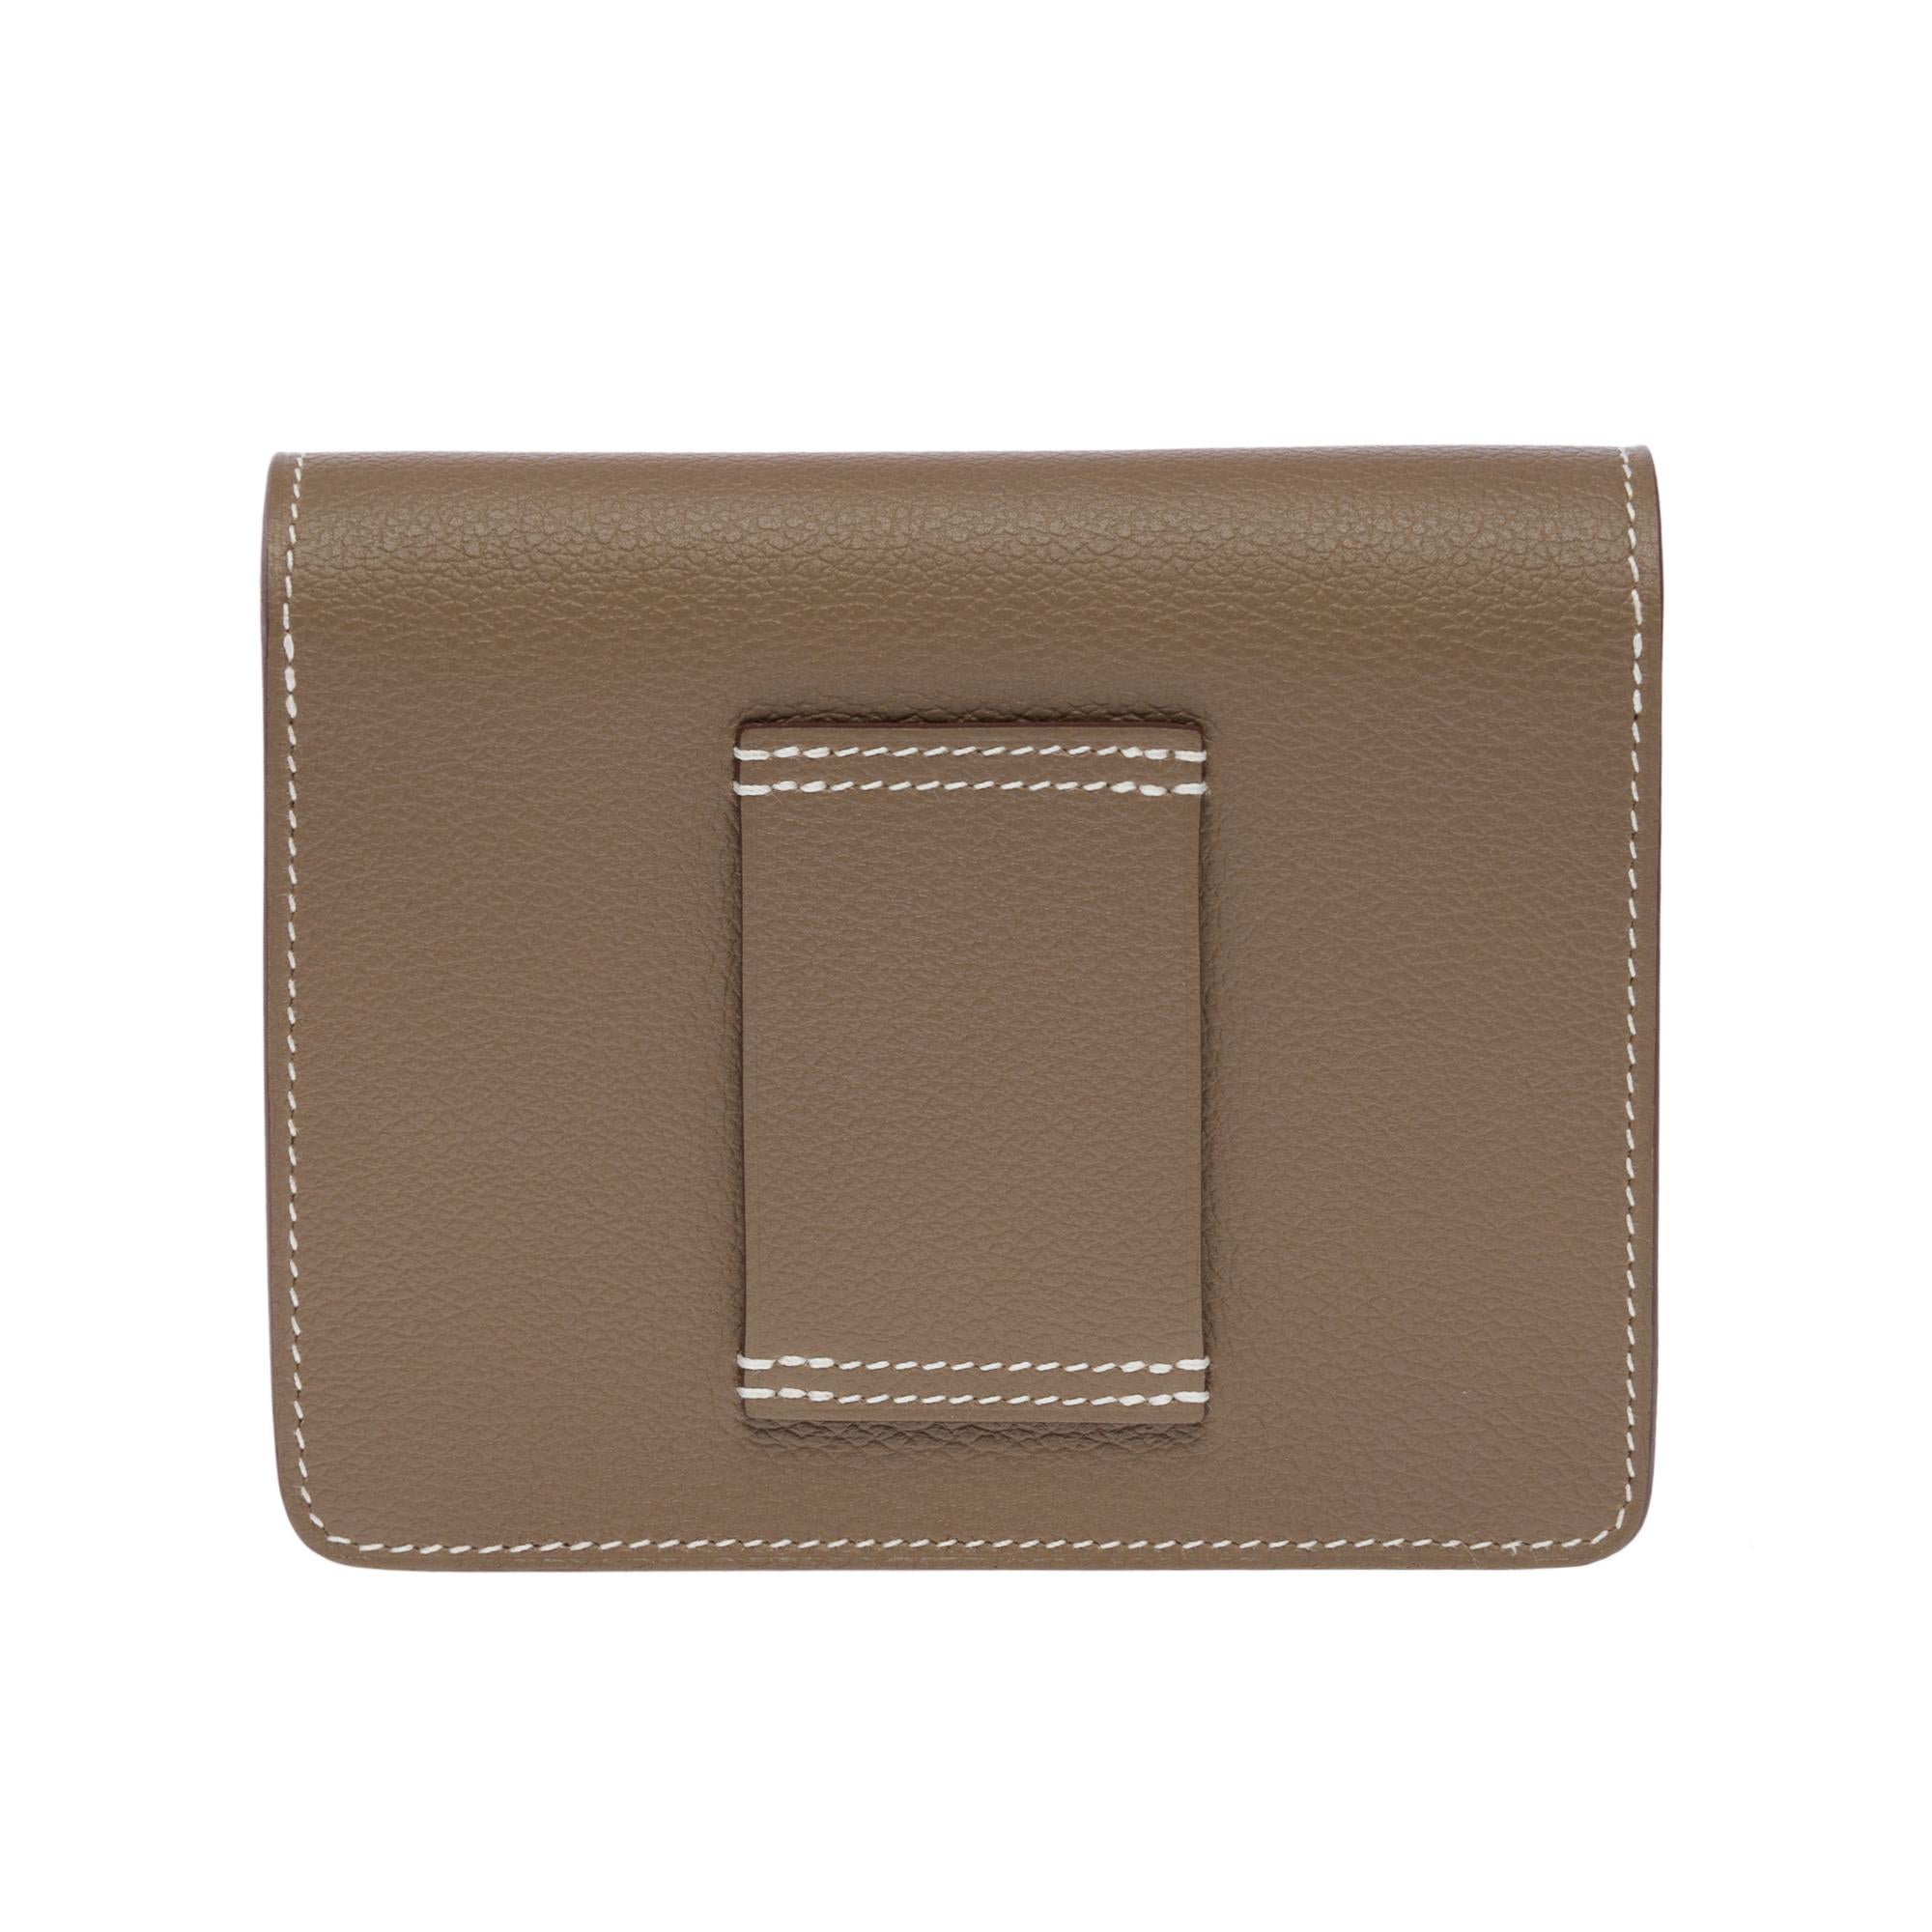 Women's or Men's Beautiful New Hermès Roulis Slim Compact Wallet in Etoupe Evercolor leather, GHW For Sale